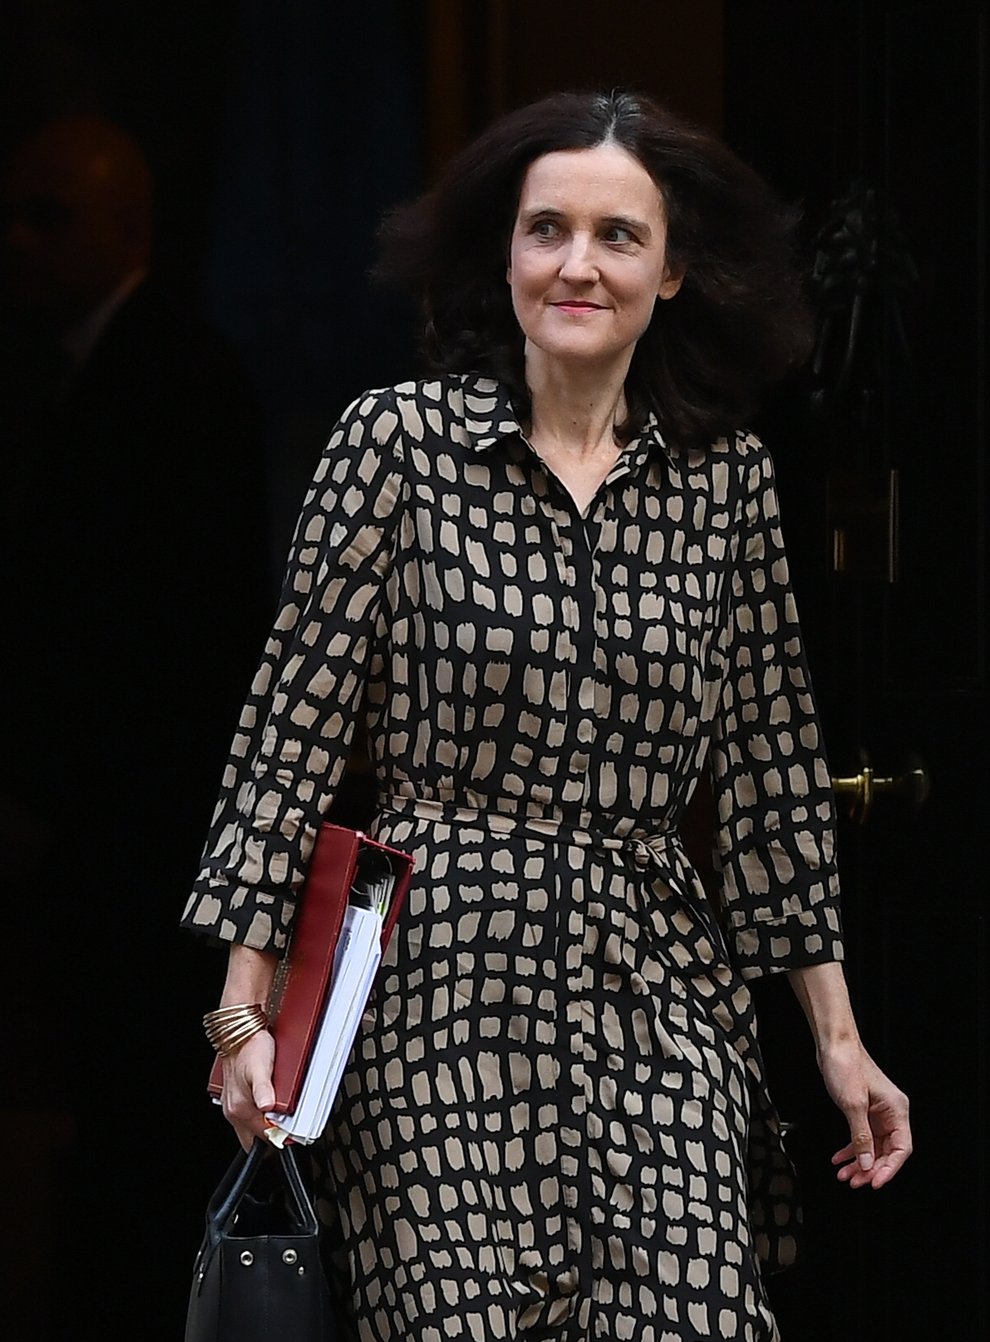 Cabinet minister Theresa Villiers, who is backing Rishi Sunak in the Tory leadership contest, has played down the defection of MP Chris Skidmore to supporting Liz Truss (Victoria Jones/PA)